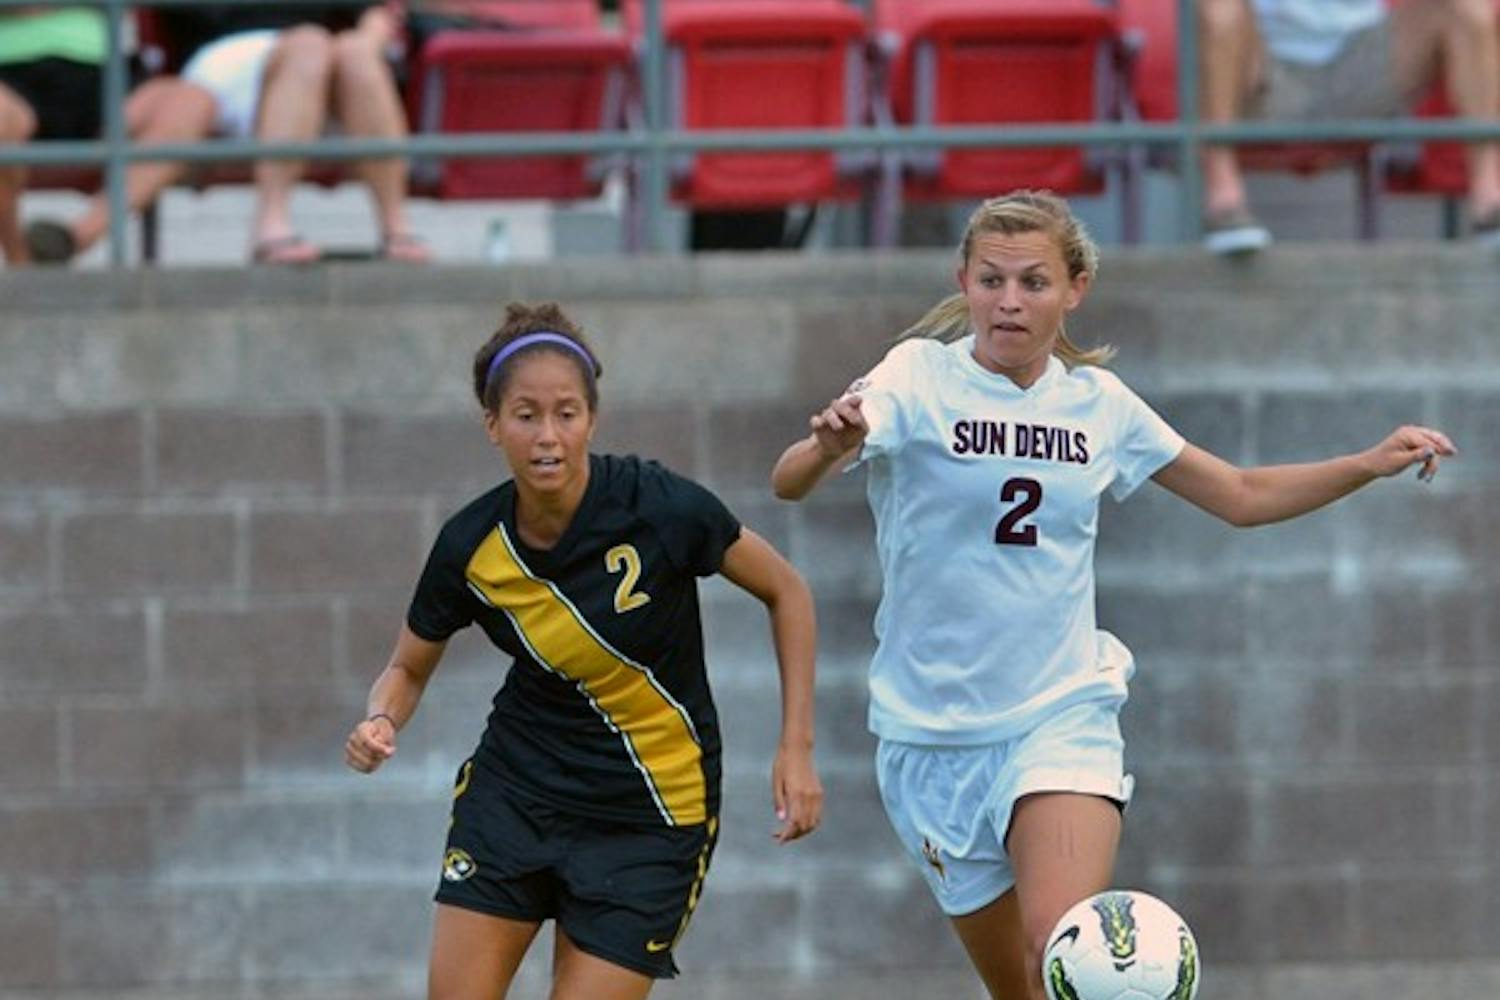 ANOTHER BLOW: ASU freshman forward Alexandra Doller looks upfield with the ball during the Sun Devils’ loss to Missouri on Sept. 11. Doller is likely out for the season after suffering an ACL tear last week. (Photo by Aaron Lavinsky)